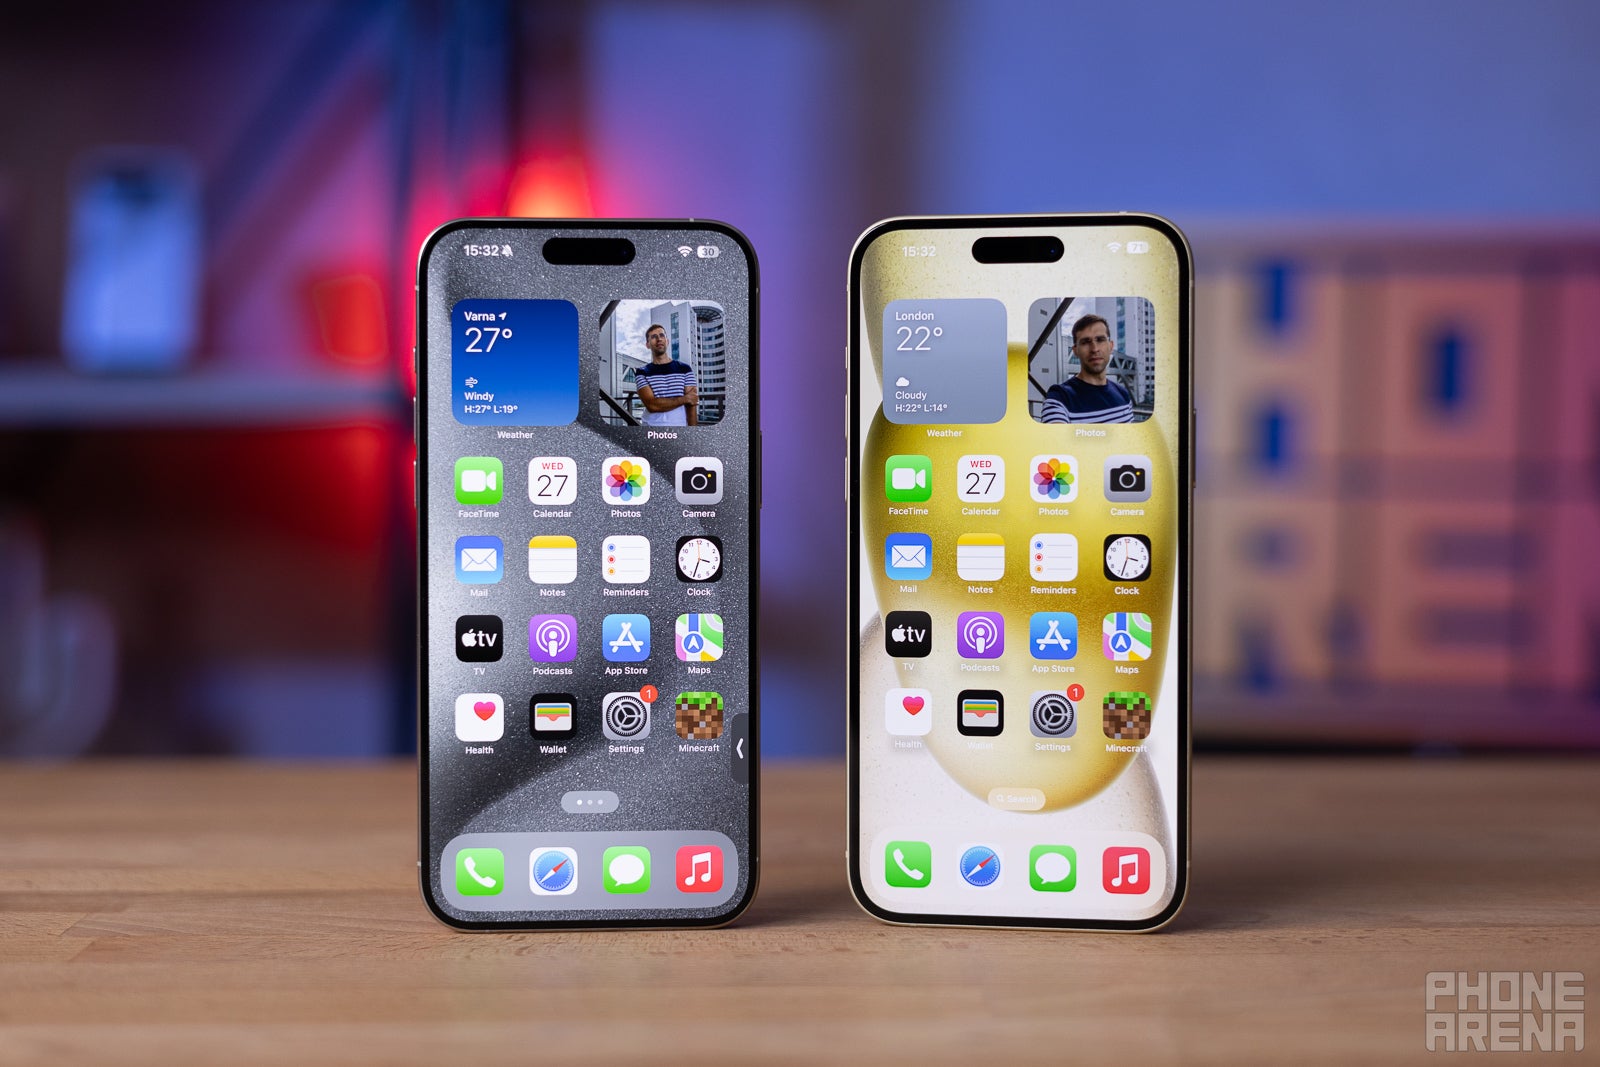 iPhone 15 Pro Max vs iPhone 15 Plus: Which new iPhone should you buy?